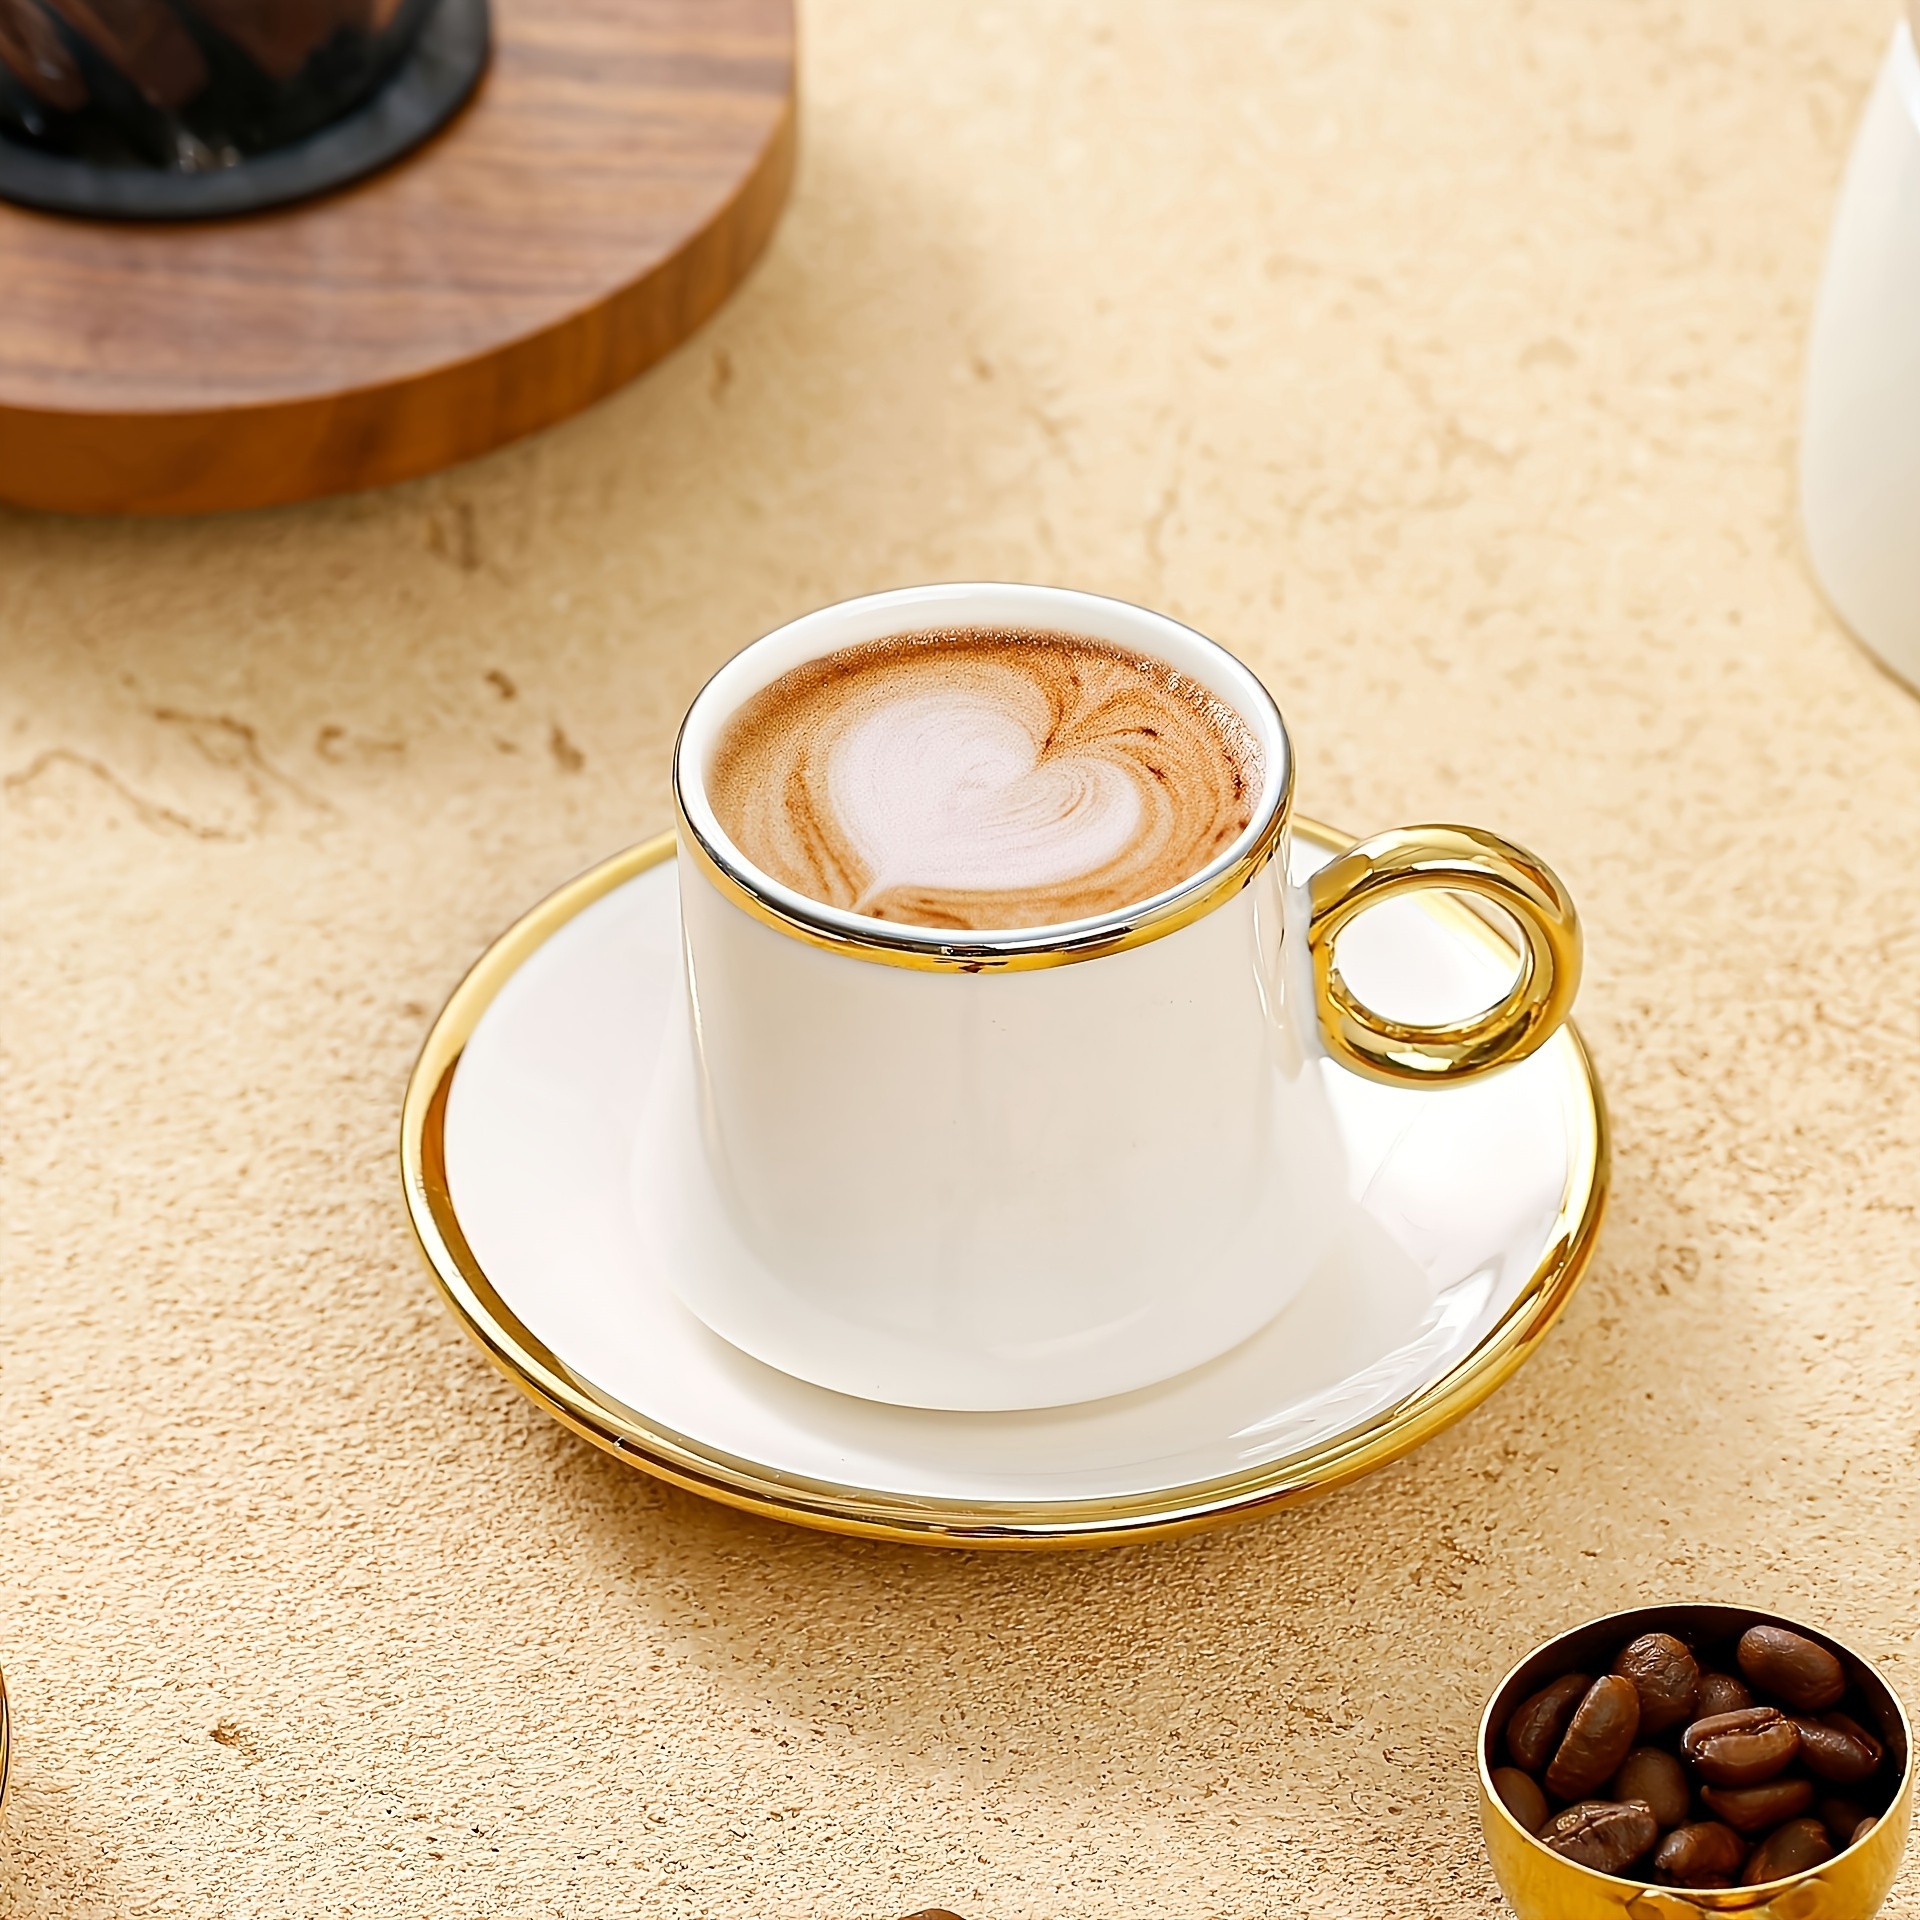 

1 Set Of 6 Cups And 6 Saucers Gold-plated Ceramic Coffee Cups, Paired With Romantic And Mellow Coffee, Can Not Only Enhance Our Taste In Life, But Also Cultivate And Intoxicate Our Hearts!